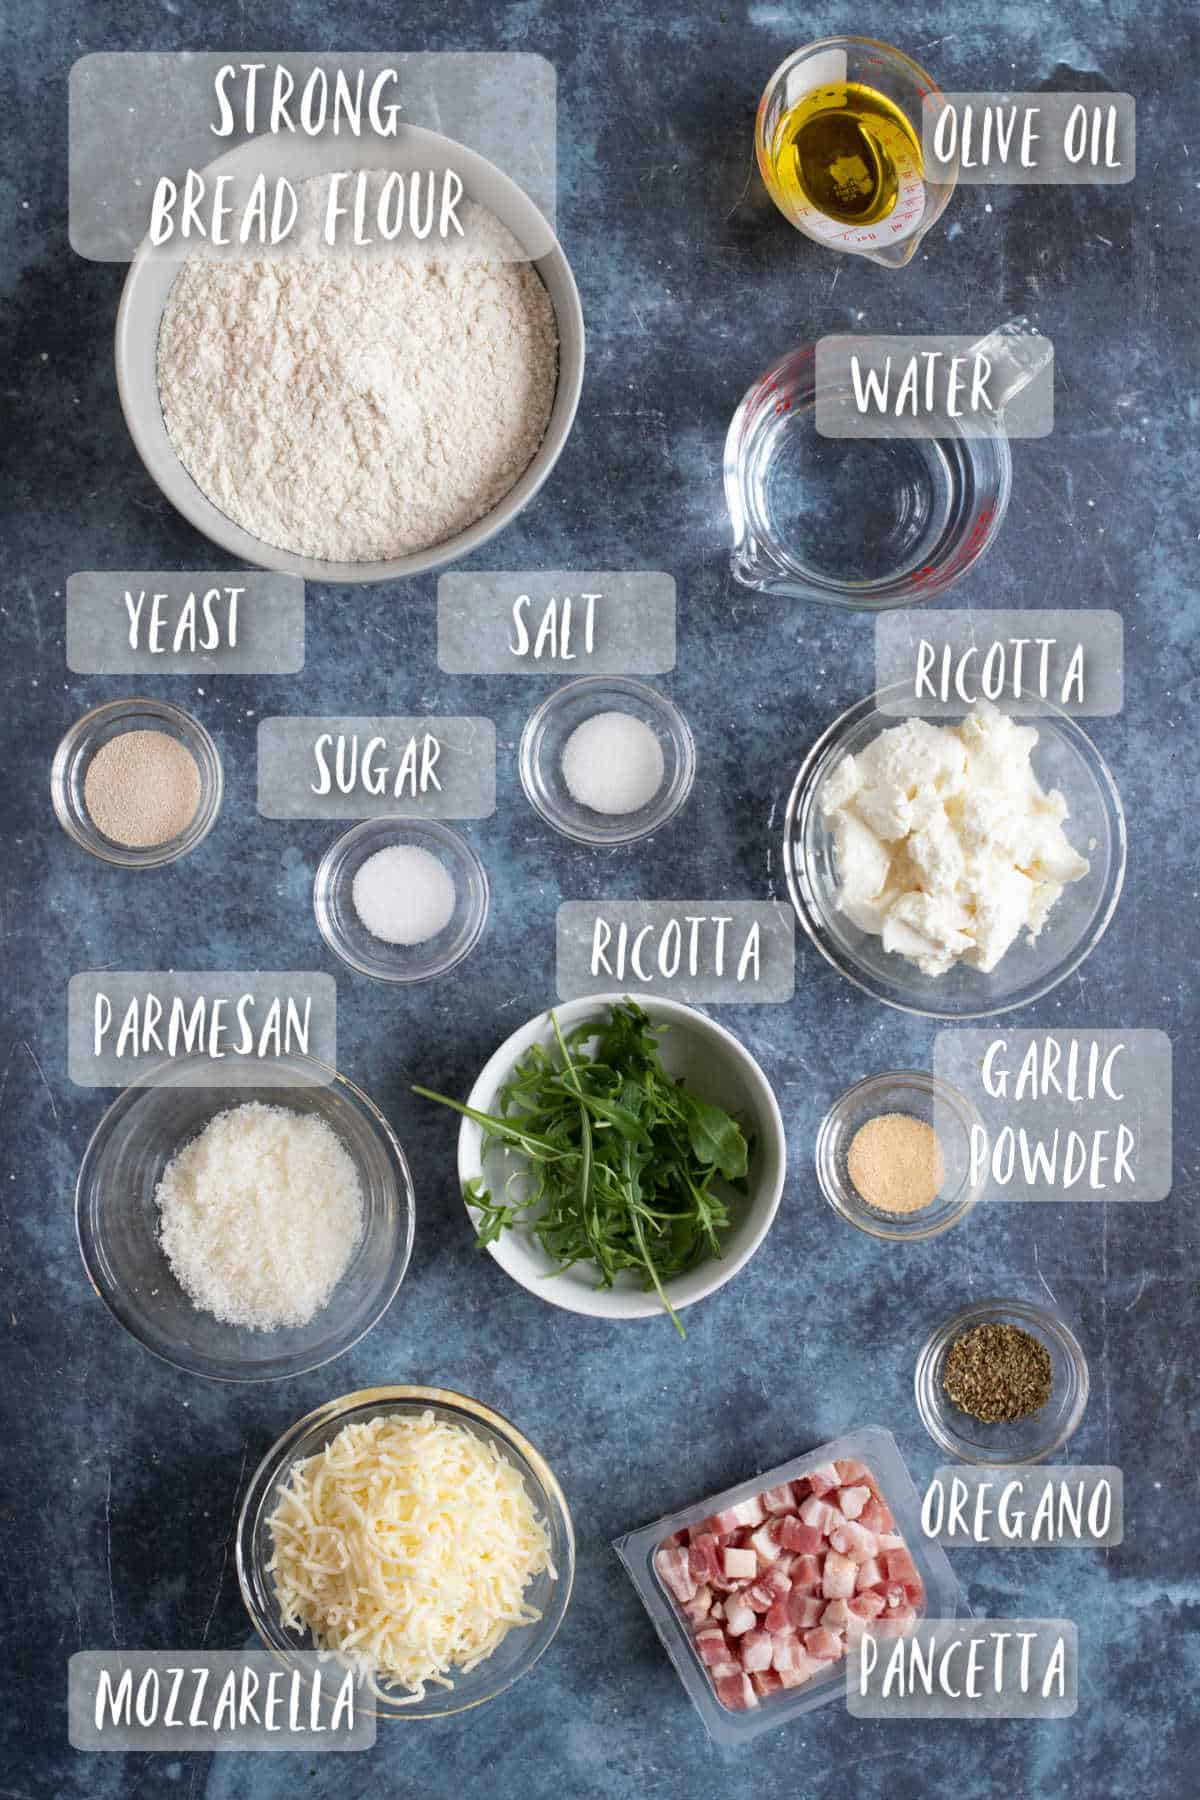 Ingredients for pizza bianca.